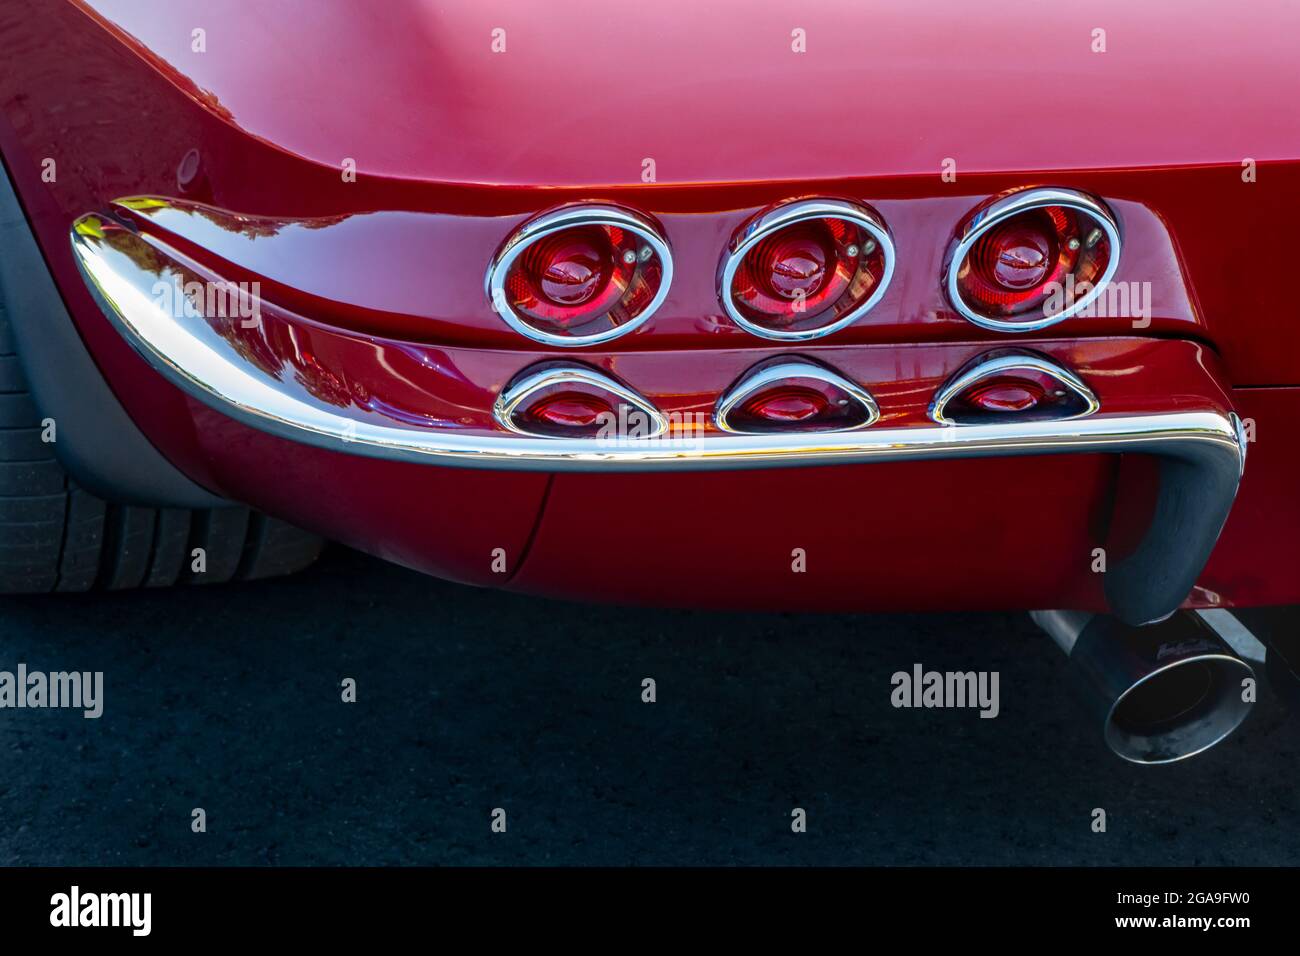 PLYMOUTH, MI/USA - JULY 26, 2021: Close-up of 1967 Chevrolet Corvette taillights at Concours d'Elegance of America at The Inn at St. John’s. Stock Photo